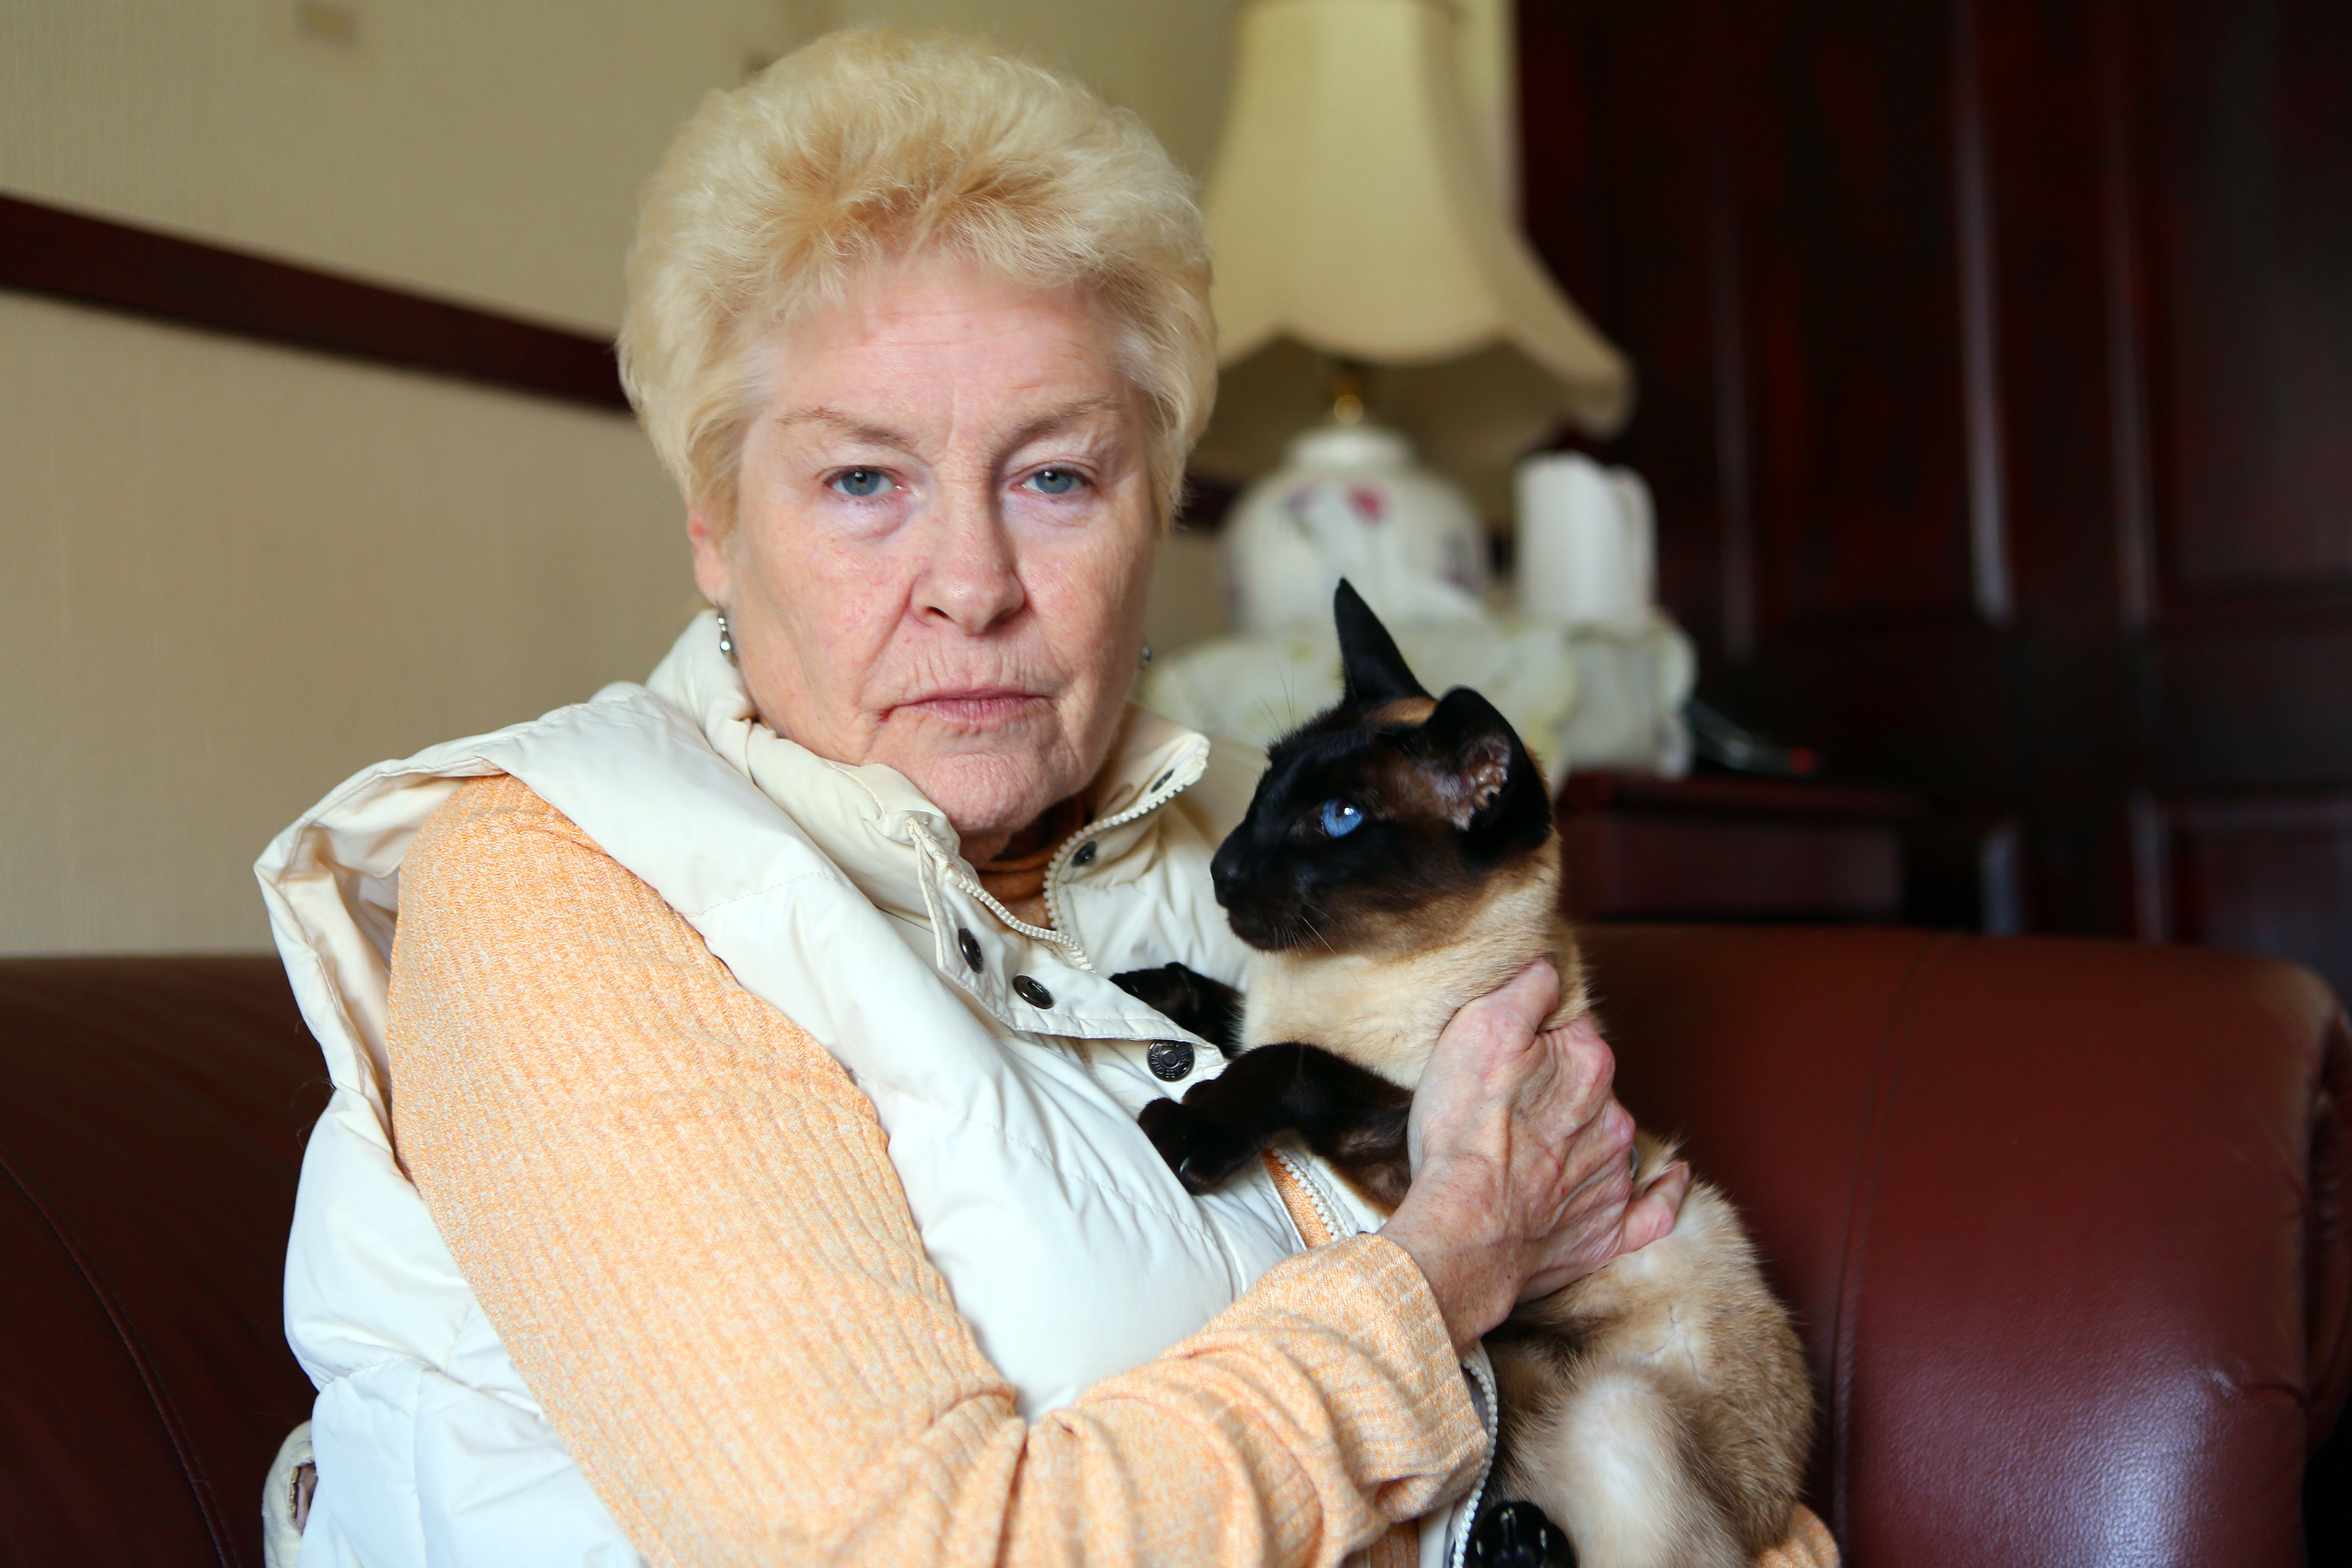 Maureen Robb has been reunited with missing Siamese cat Sara.